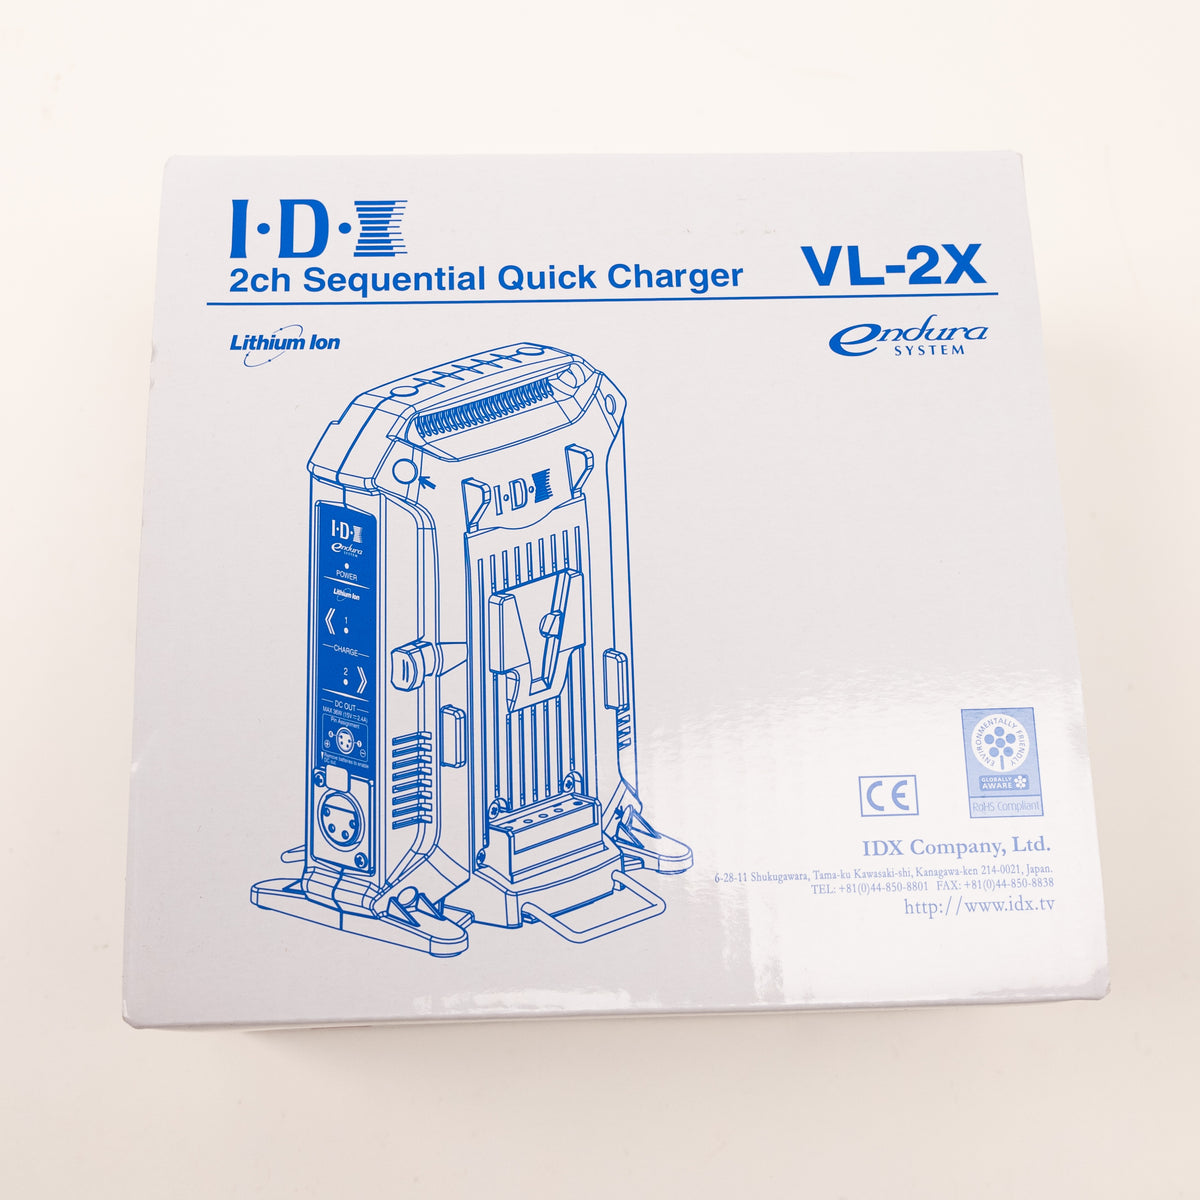 CinemaCameras.com - 6.1.22 - Photo - Selects (362 of 399) - VL-2X Charger (Battle Tested in Sealed Box).jpg